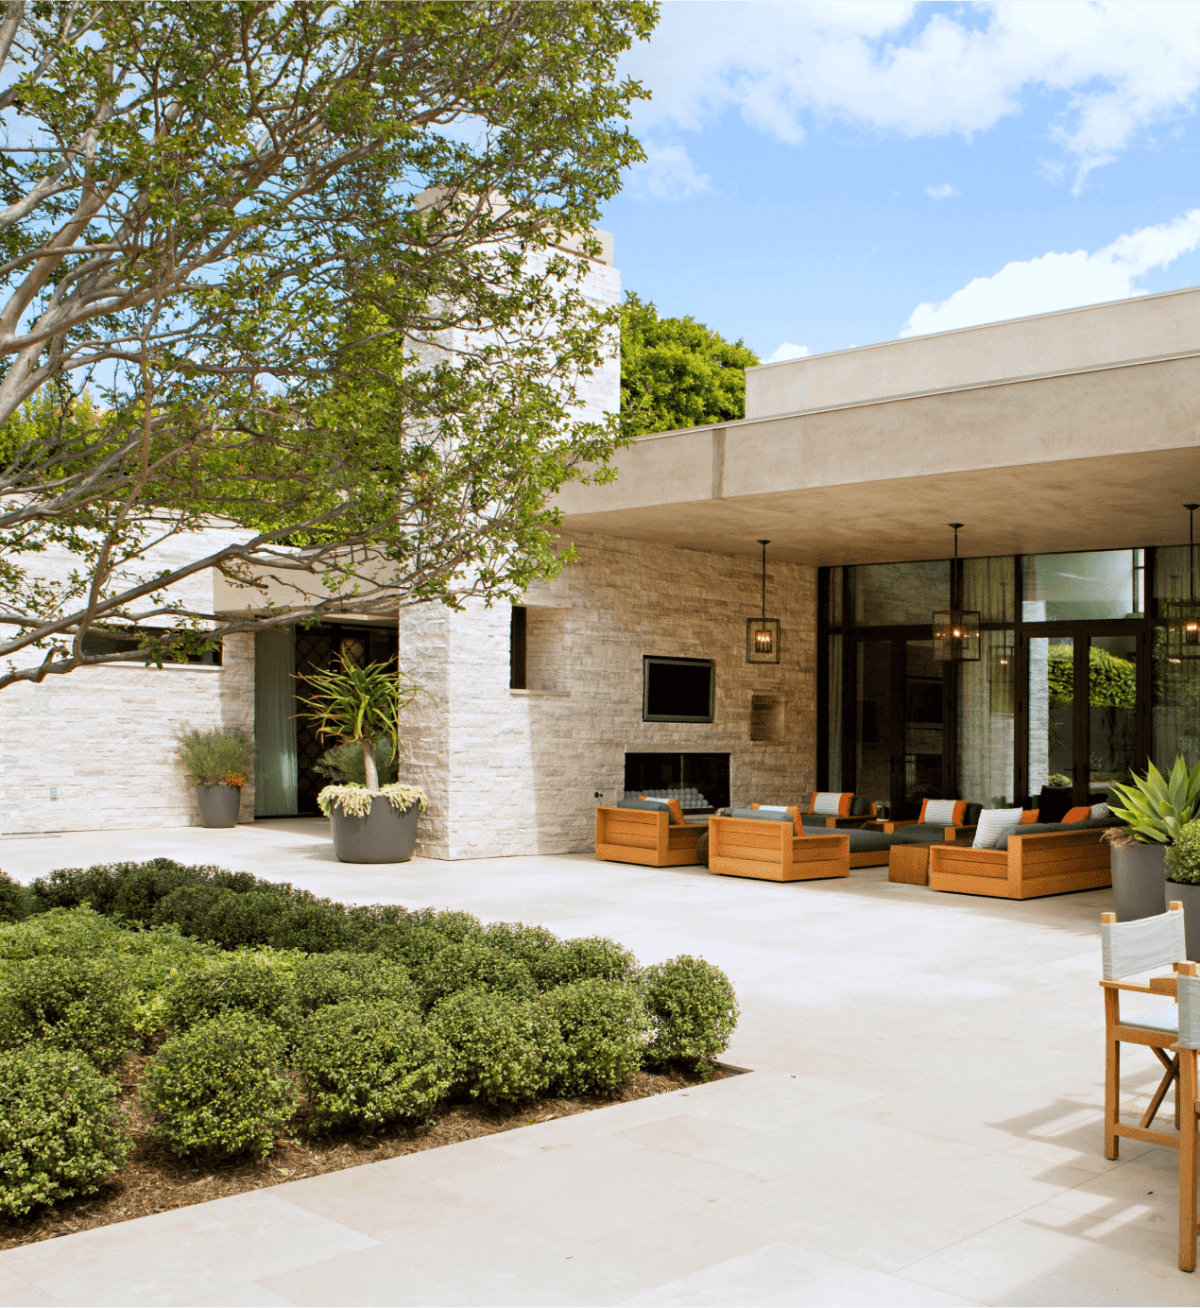 A contemporary house with a patio and a tree in the front yard.